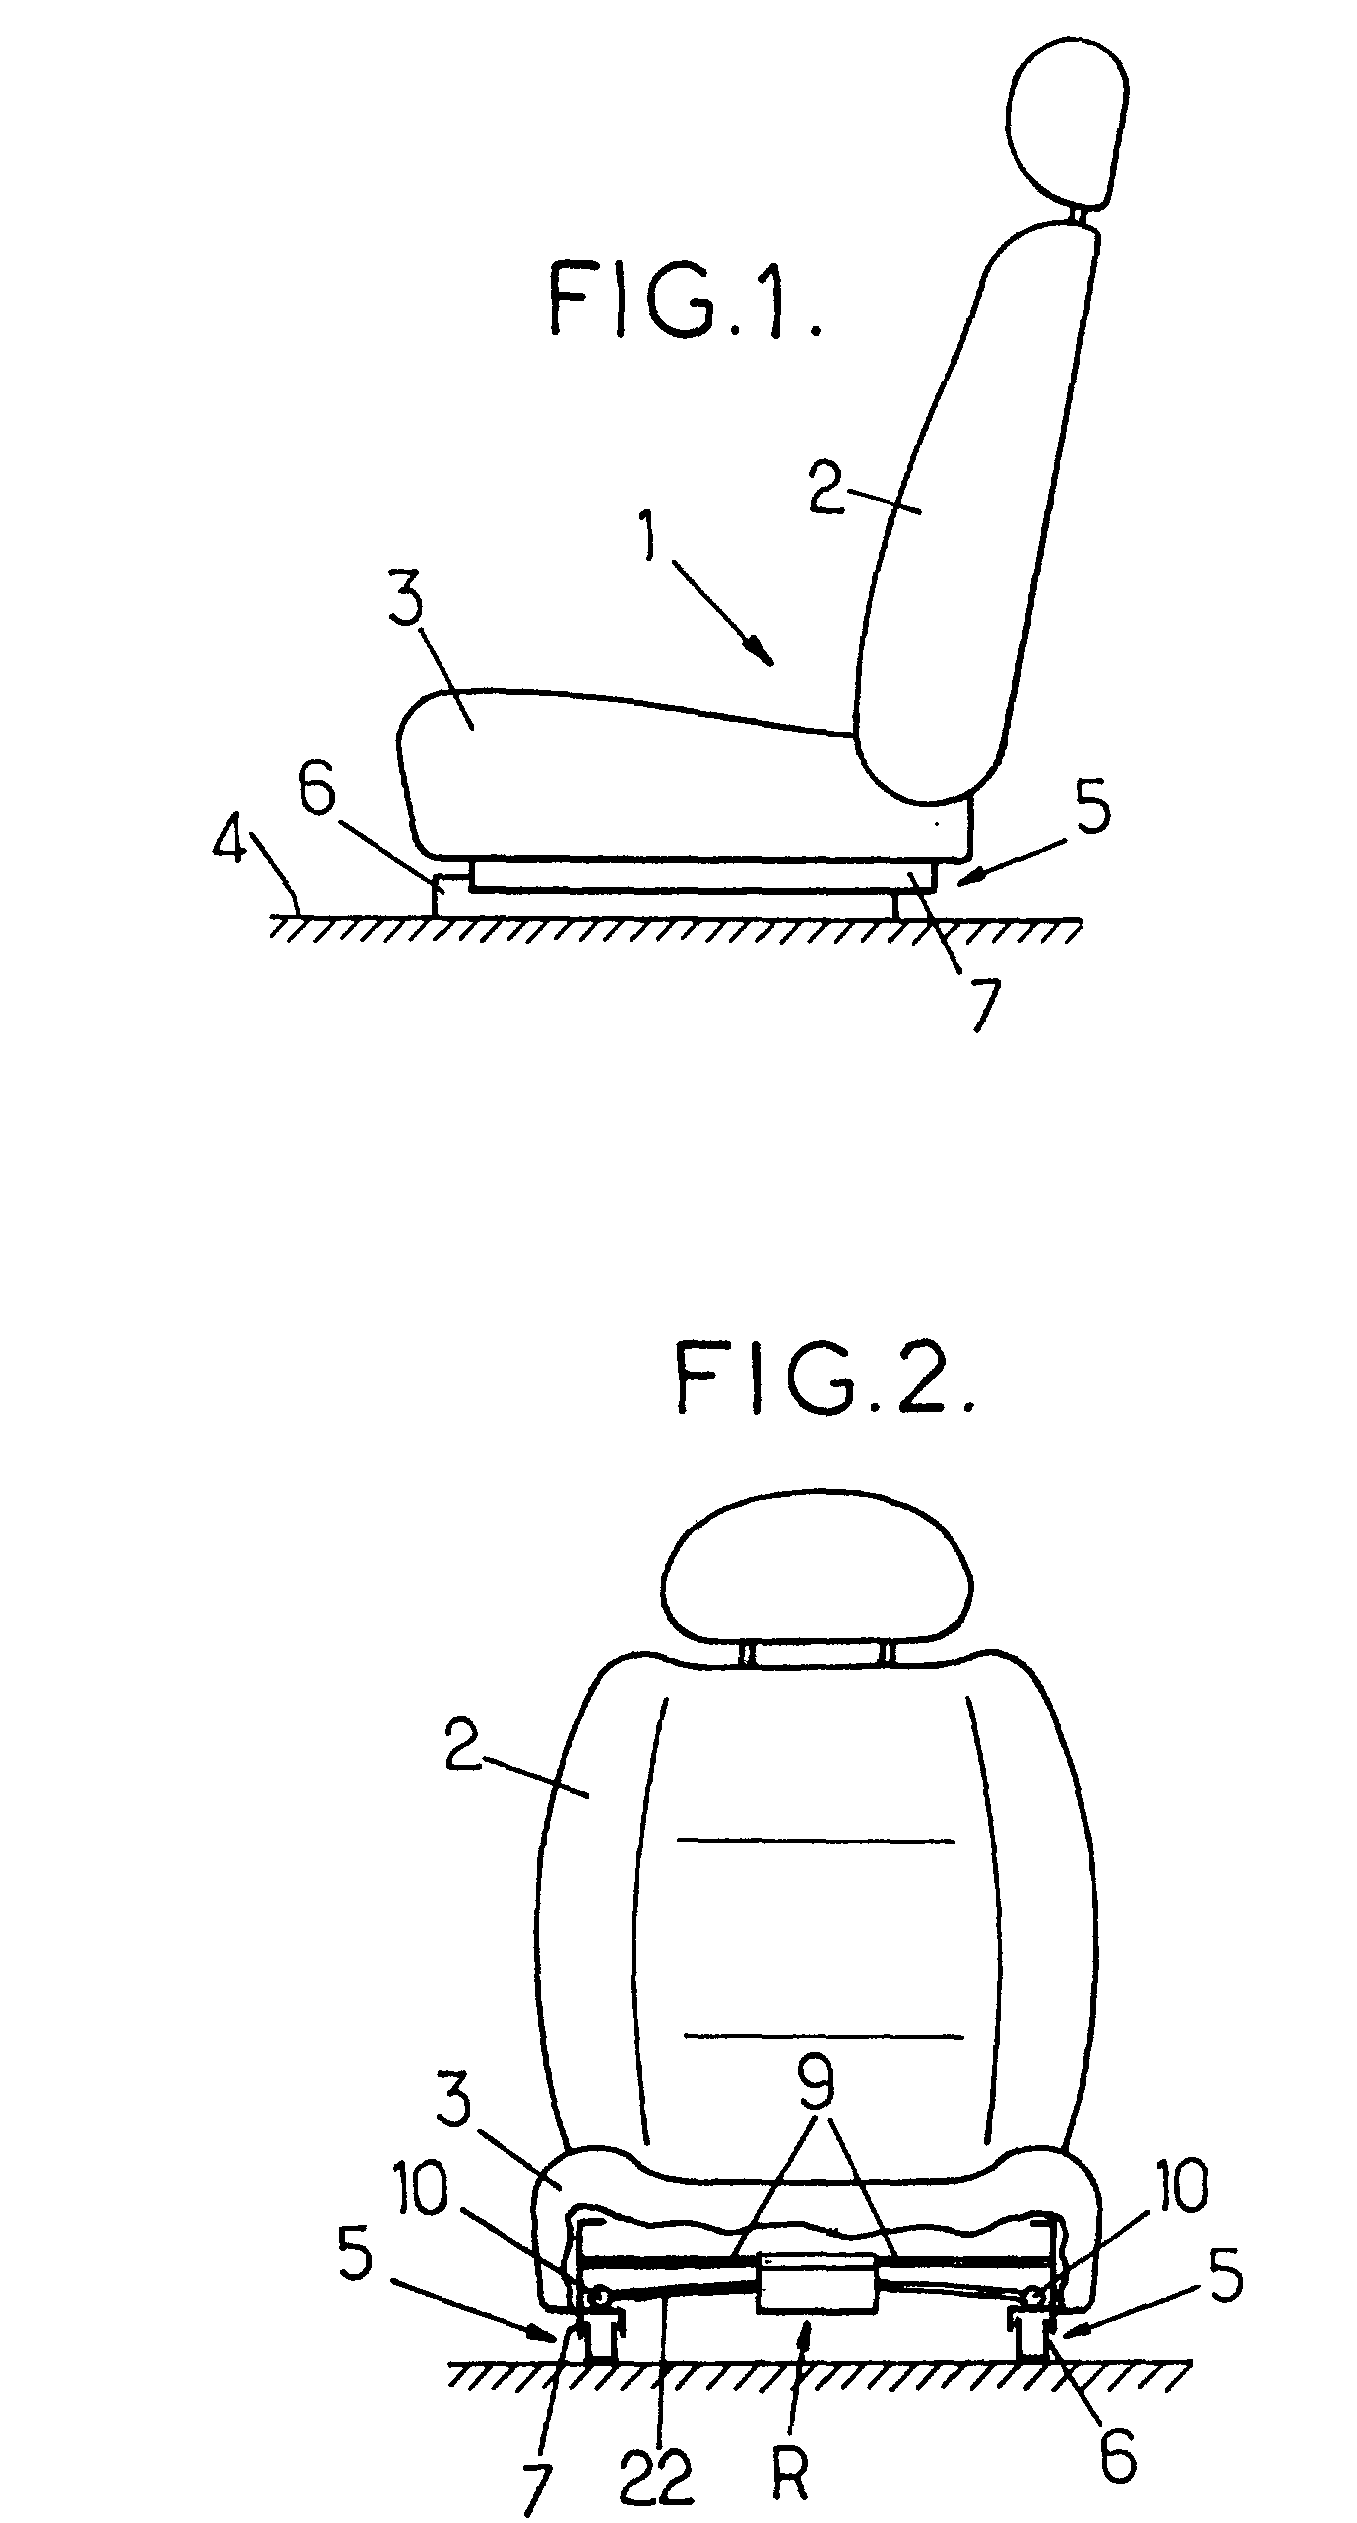 Motor-driven device for adjusting a vehicle seat